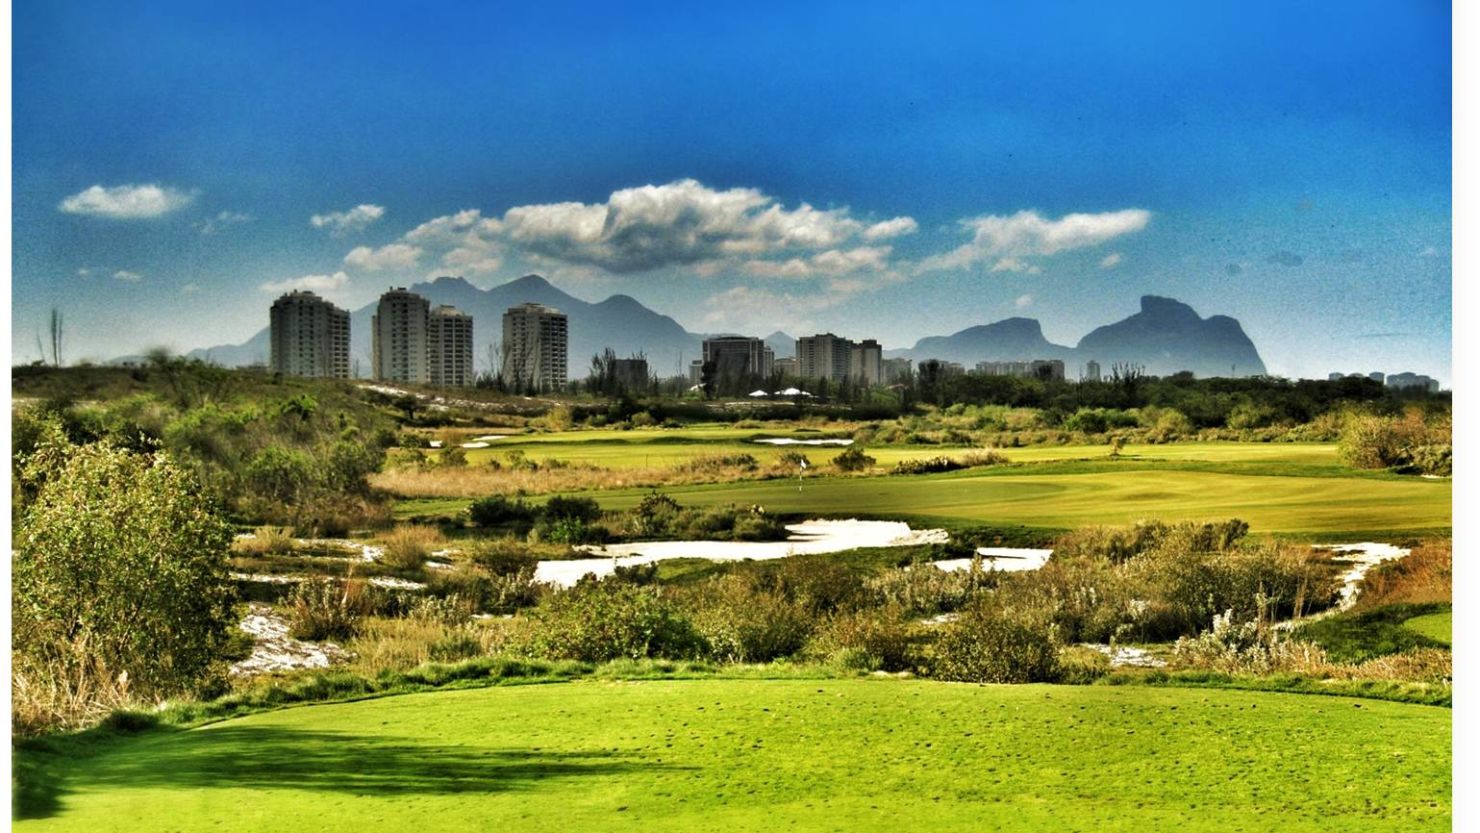 An illustrative view of the proposed Olympic golf course in the suburbs of Brazilian city Rio.